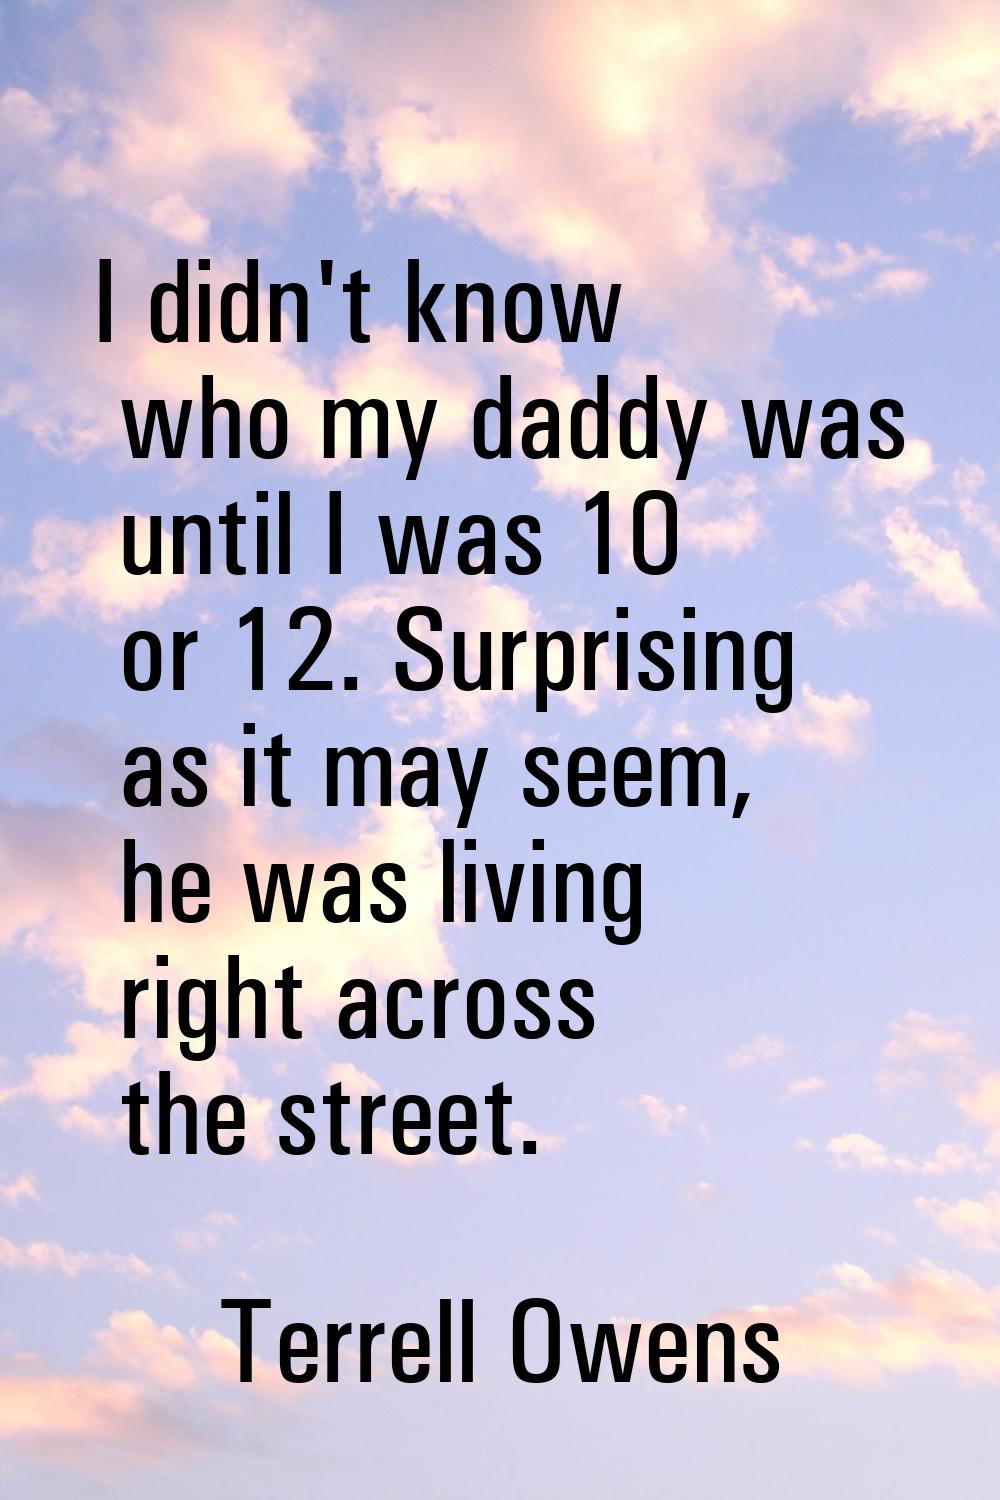 I didn't know who my daddy was until I was 10 or 12. Surprising as it may seem, he was living right